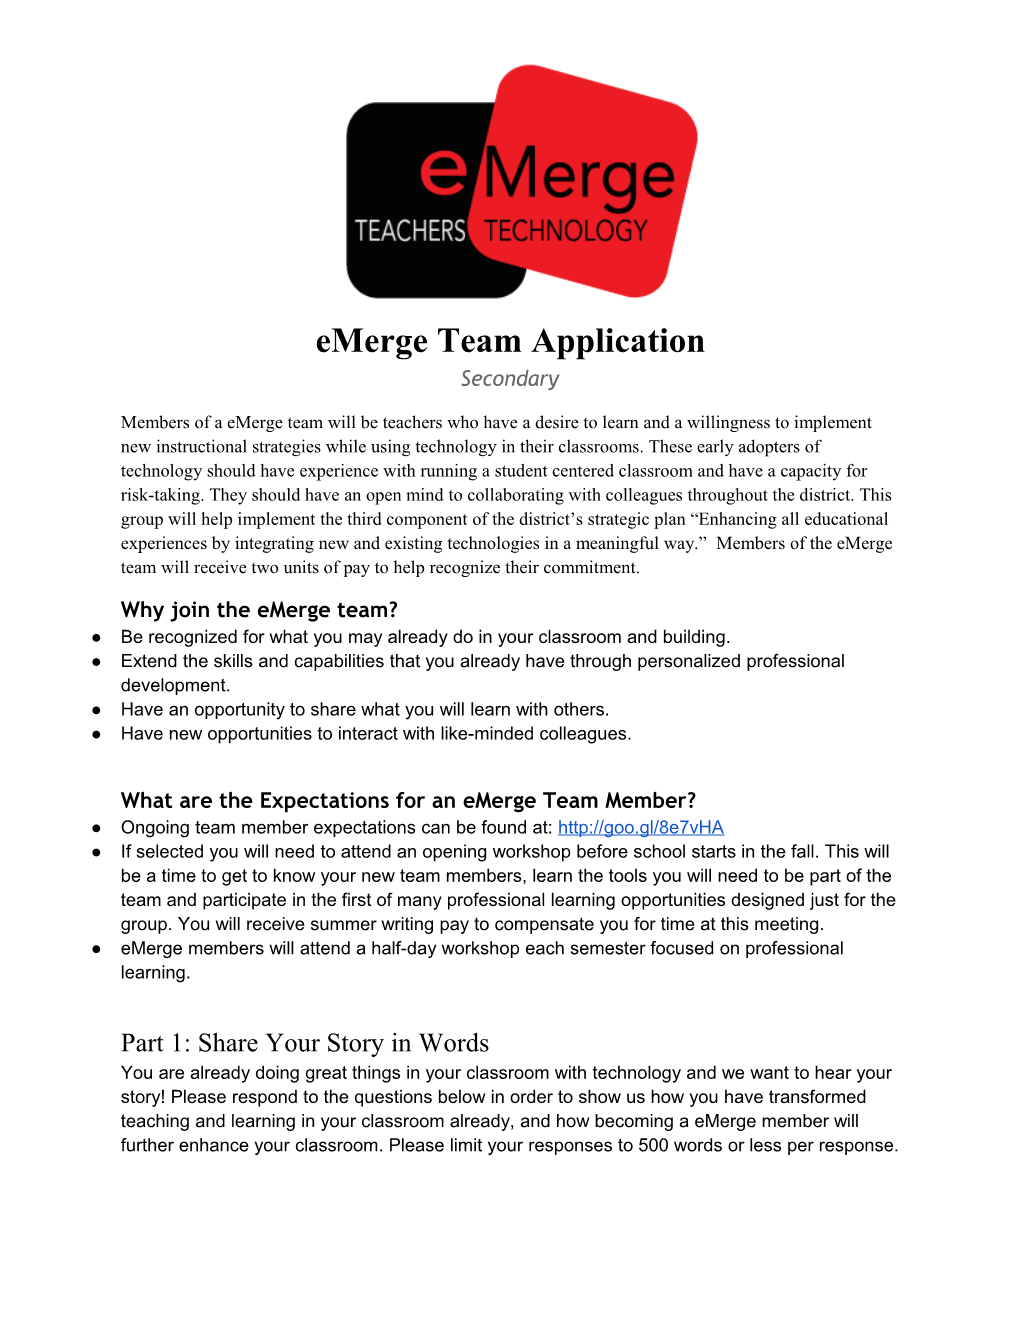 Why Join the Emerge Team?